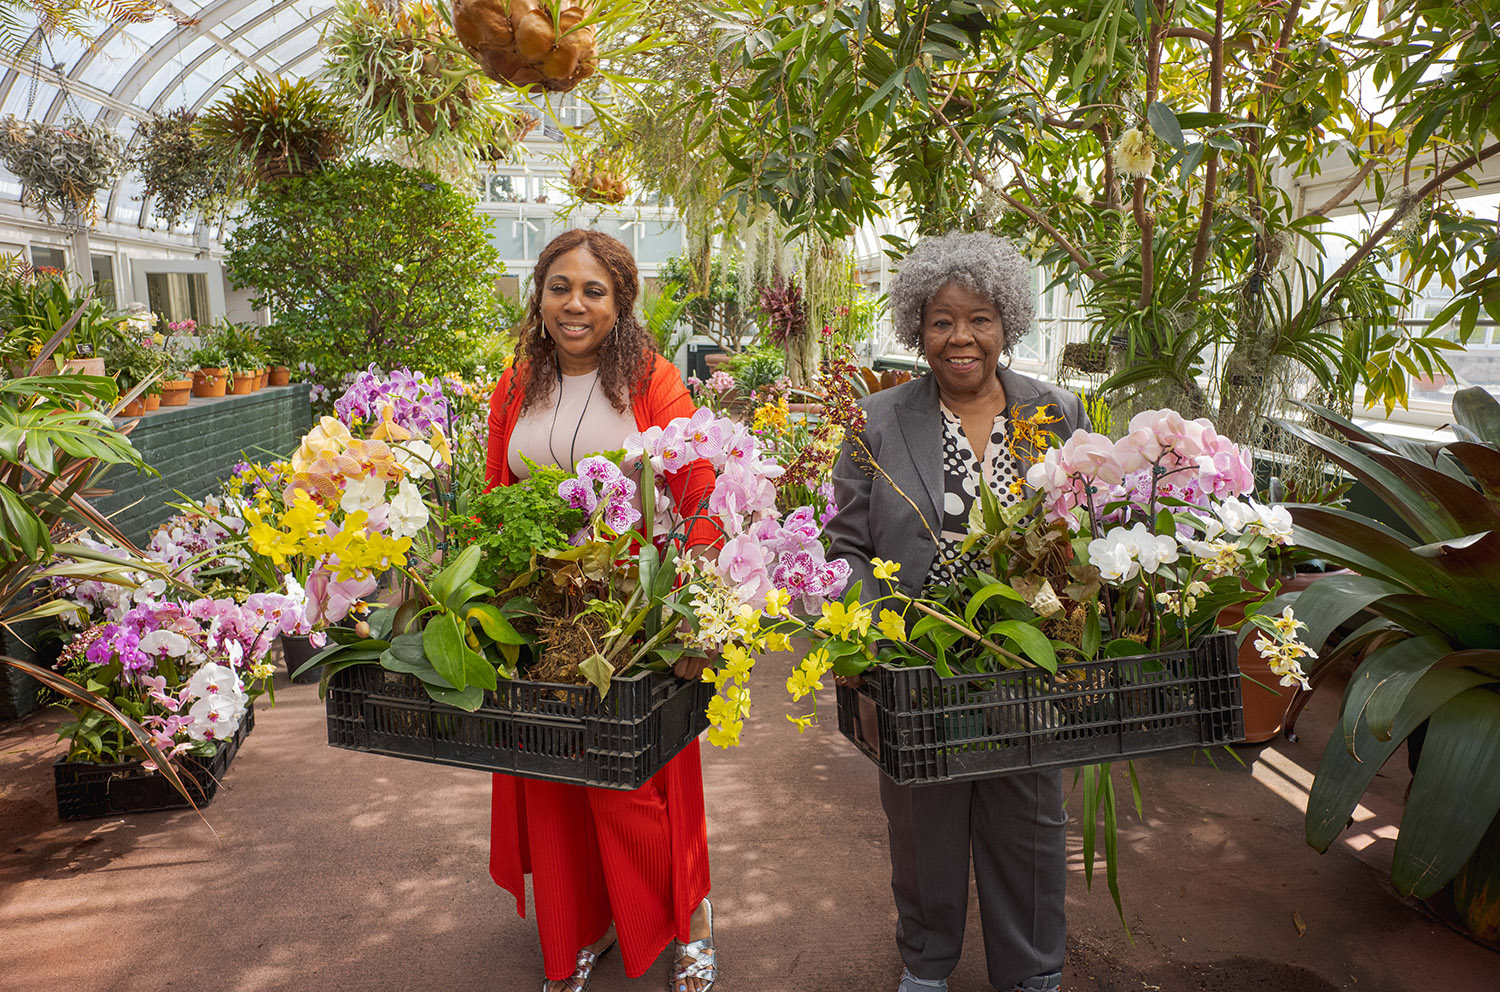 Two people in red and black outfits carry baskets of colorful flowers through a conservatory